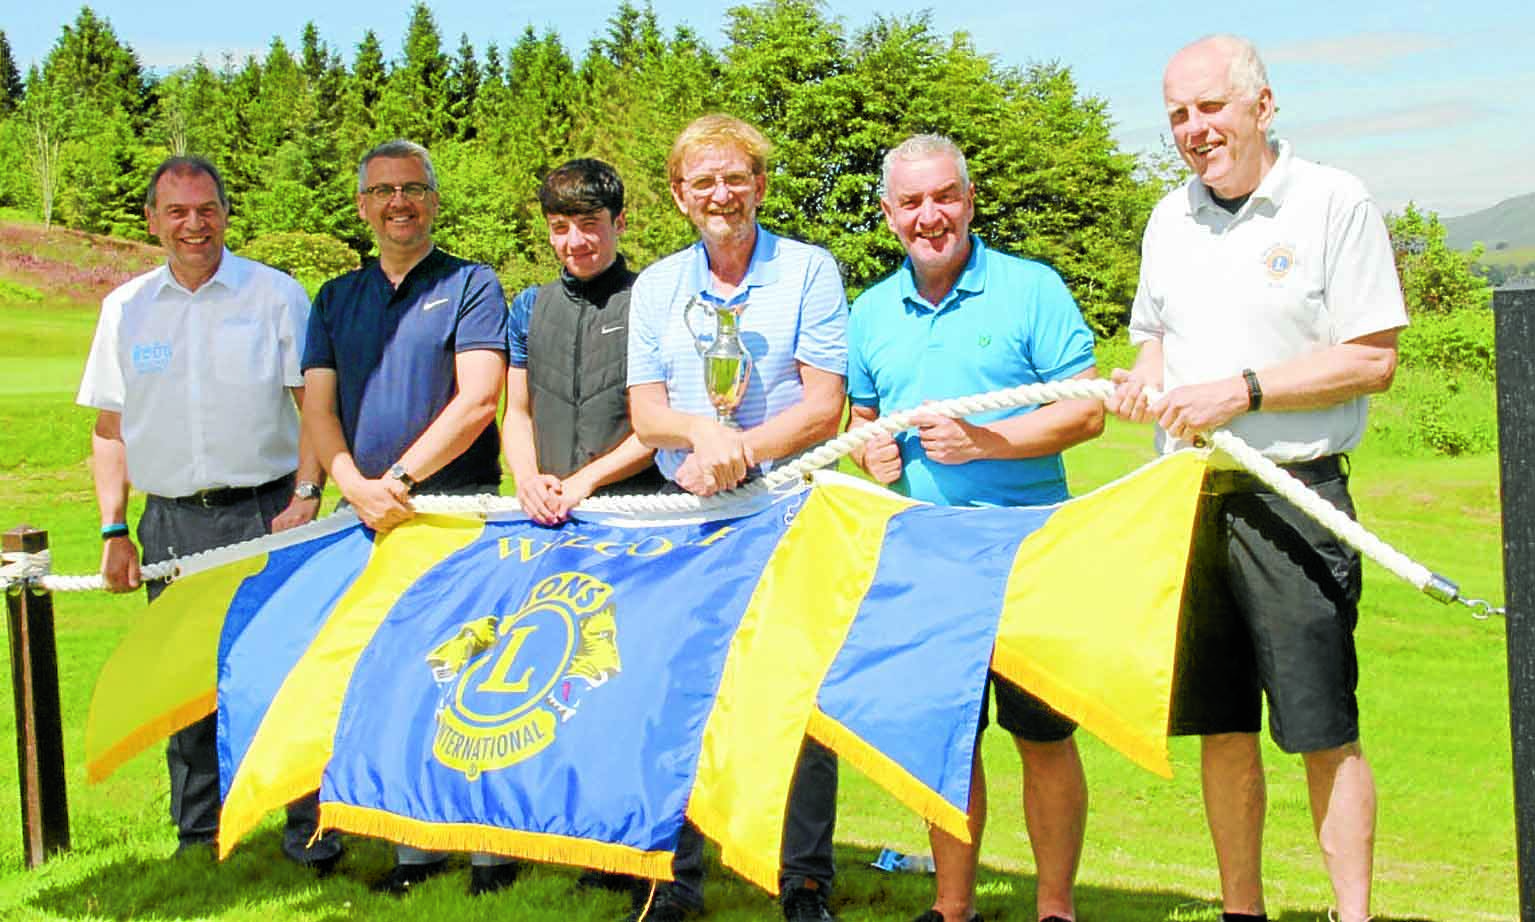 Lions golf day raises over £1k for charity